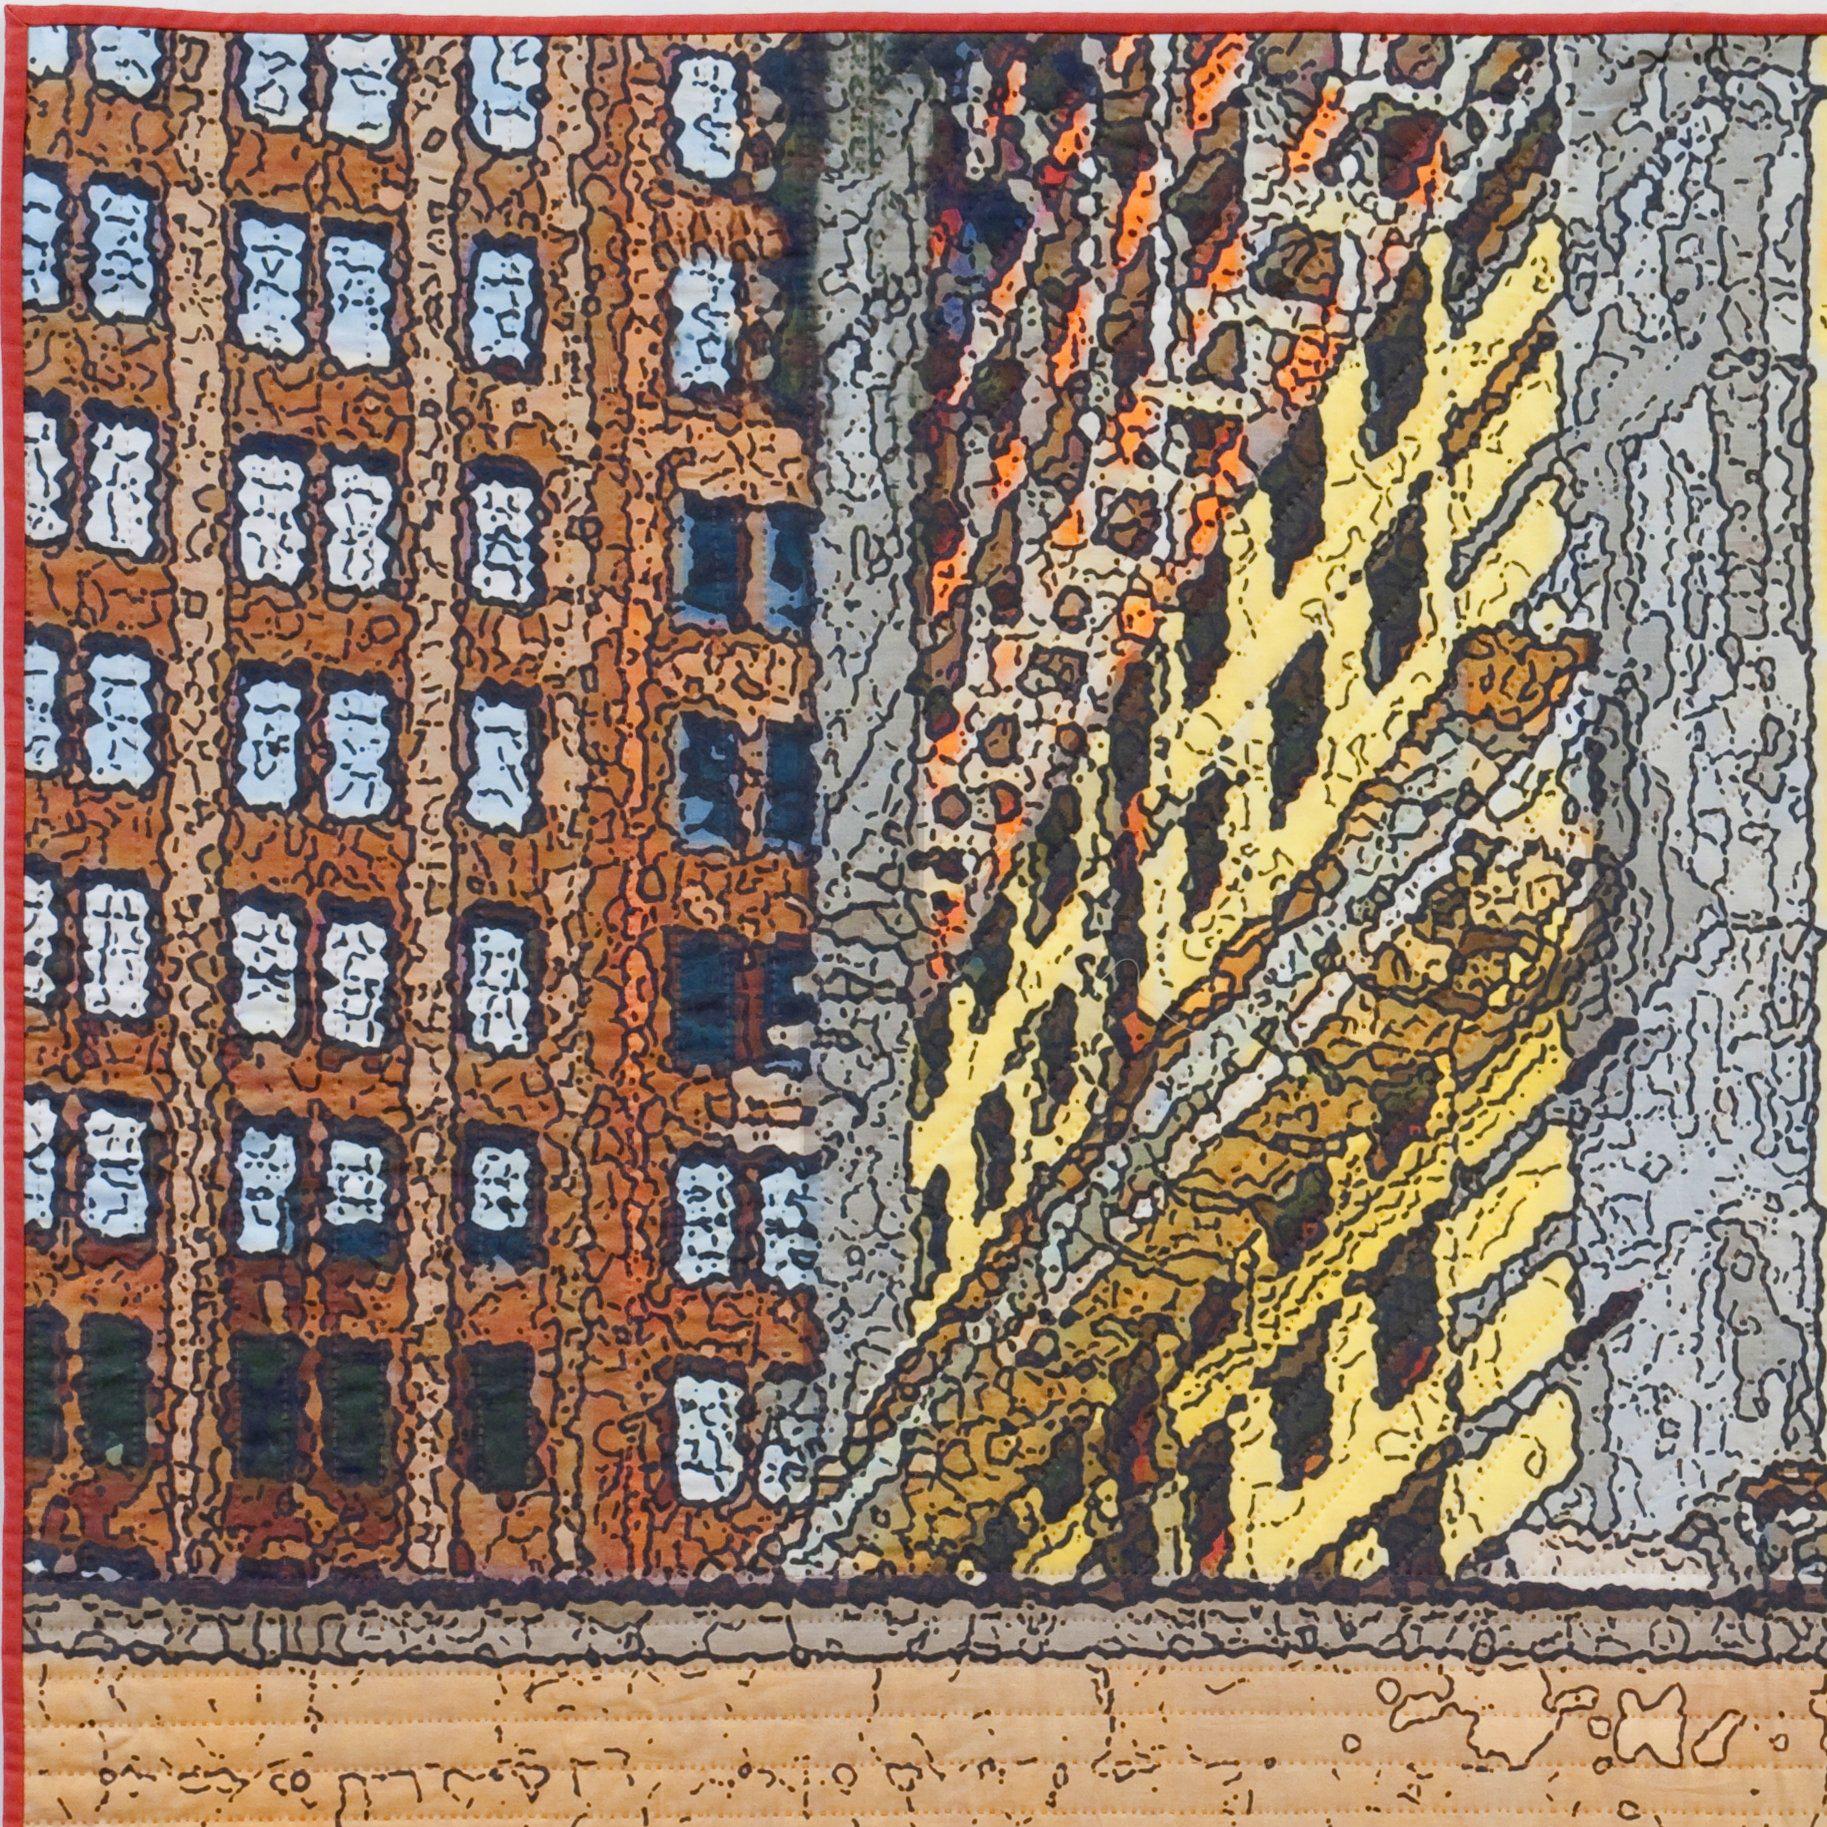 Soft City: Canal Street Construction, Mixed Media on Other - Contemporary Mixed Media Art by Marilyn Henrion